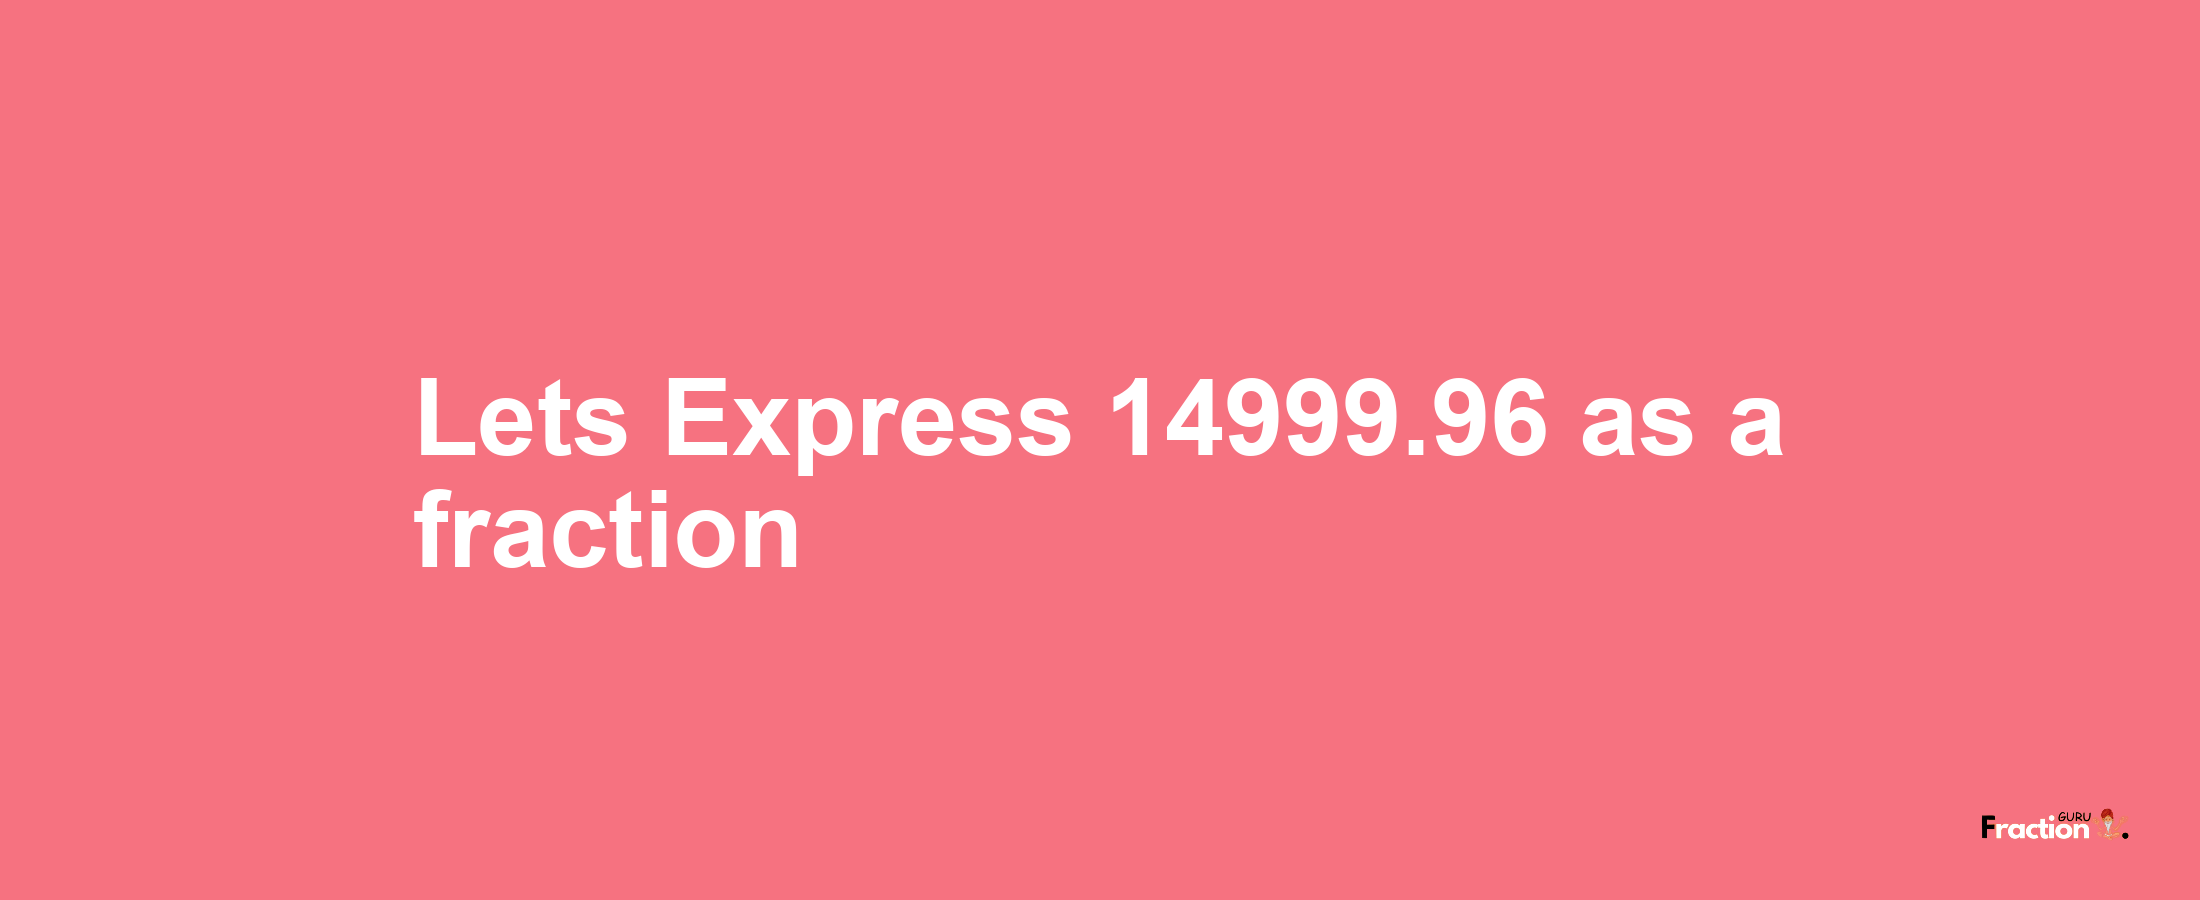 Lets Express 14999.96 as afraction